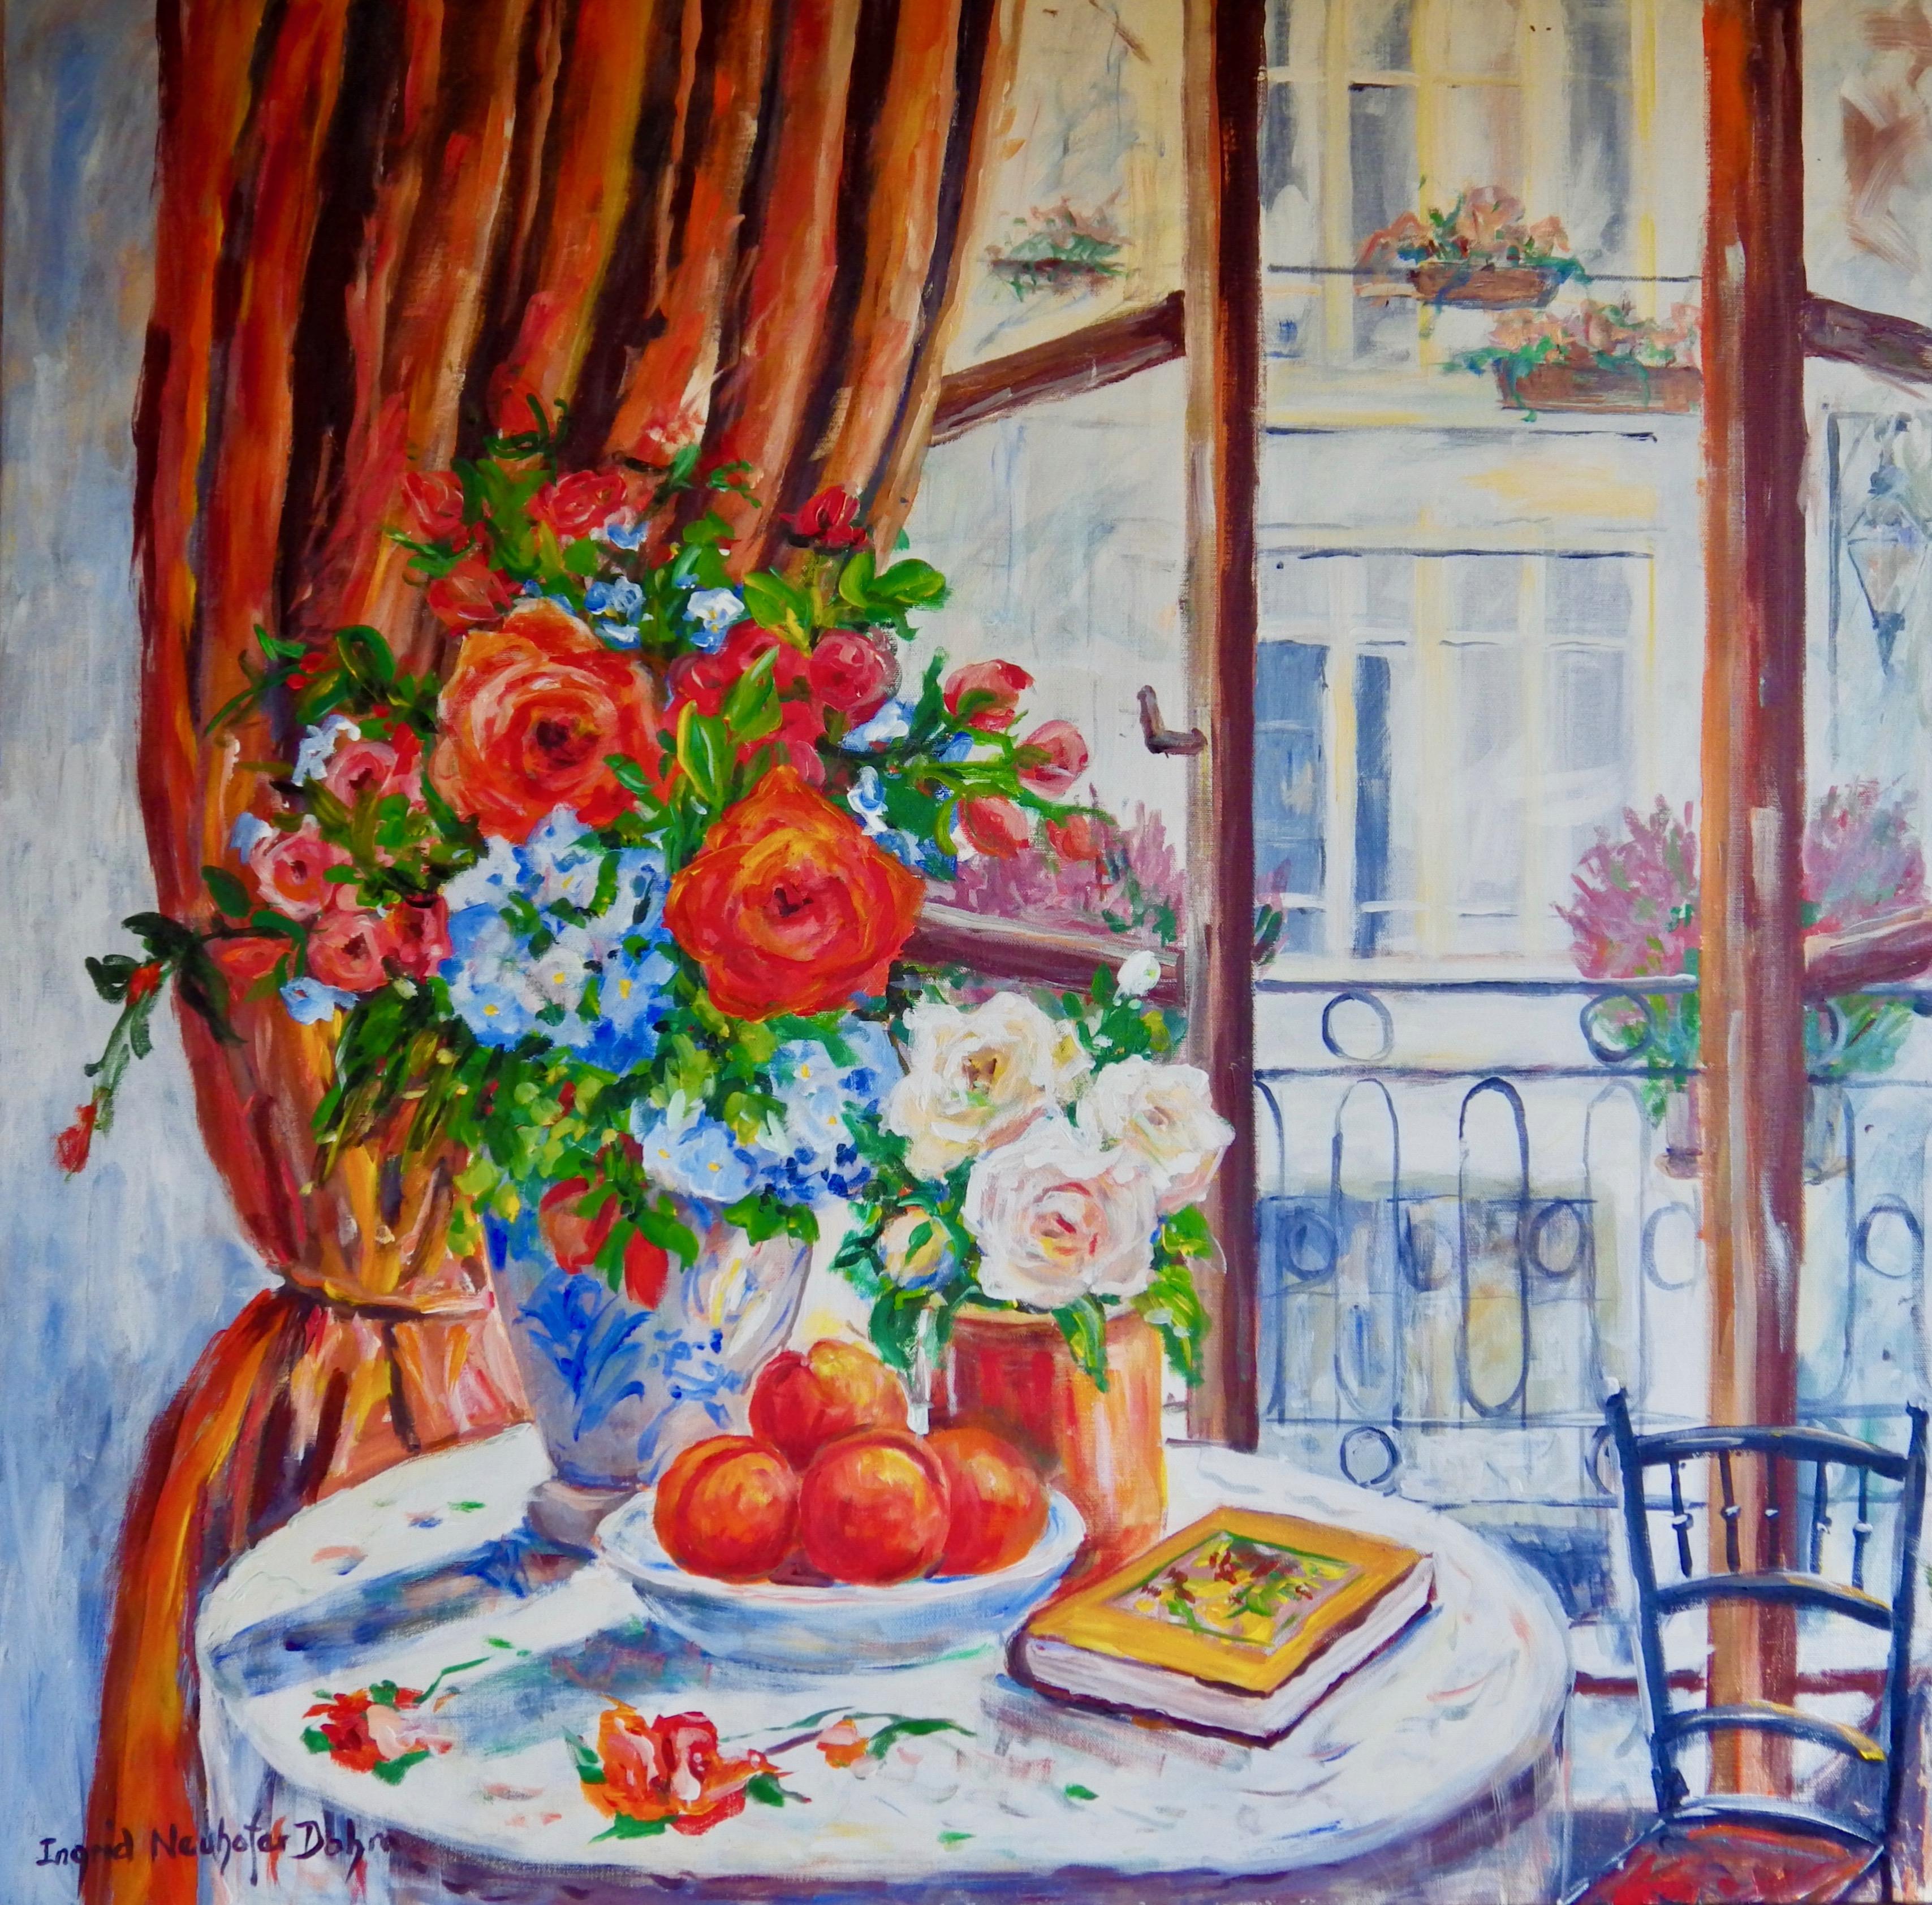 Afternoon Repose, Original Signed Impressionist Still Life Painting on Canvas